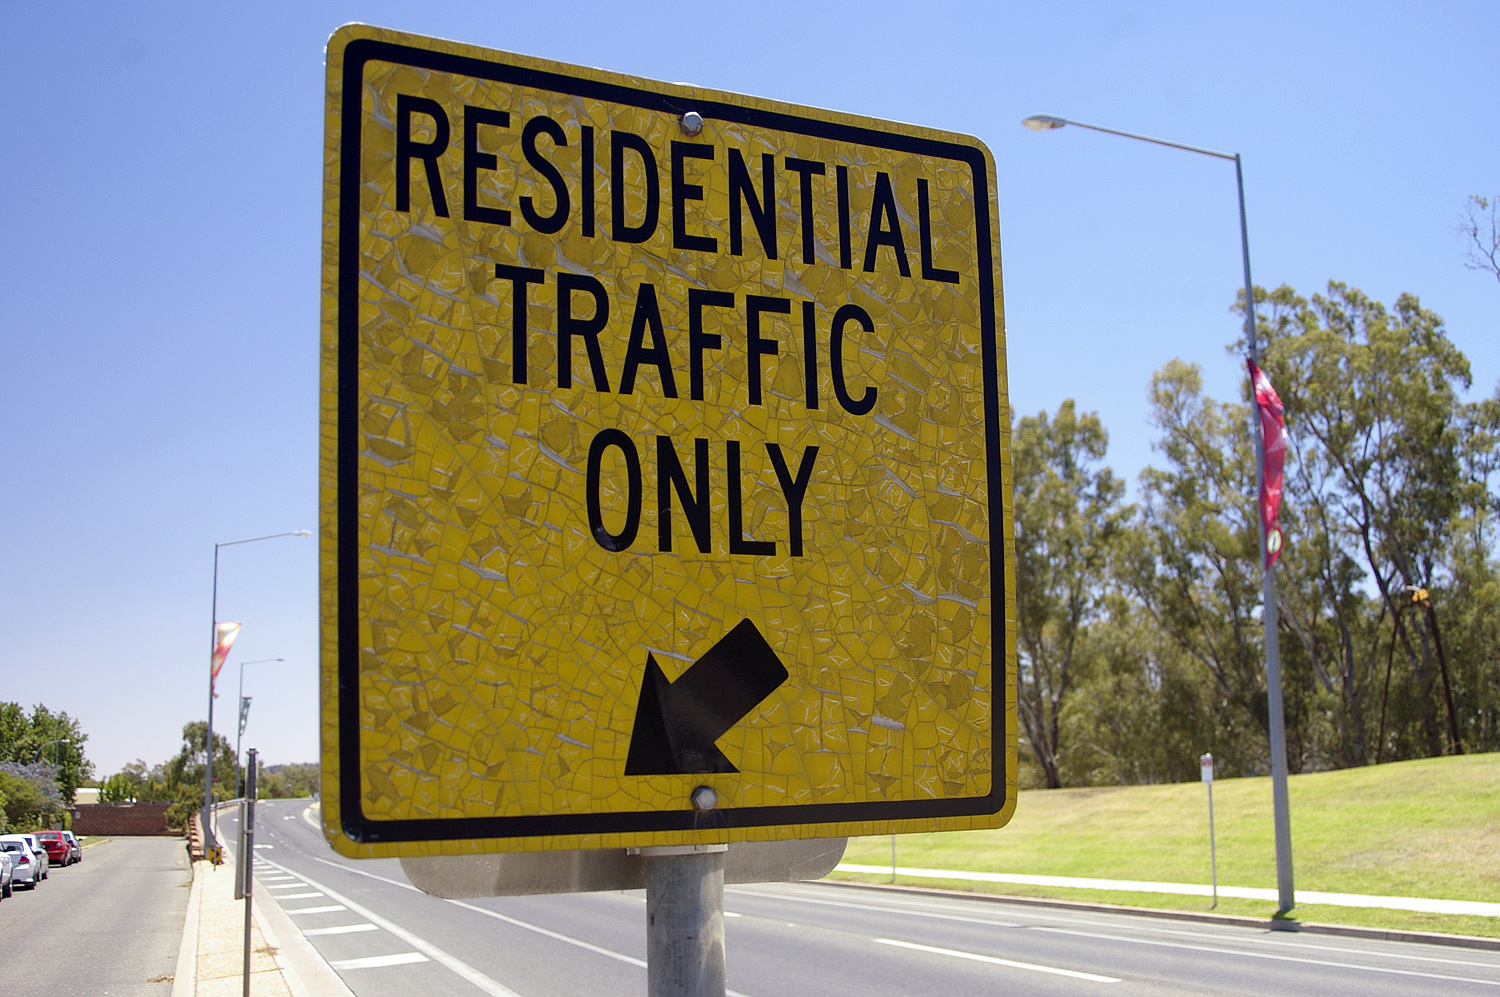 Residential Traffic Only sign